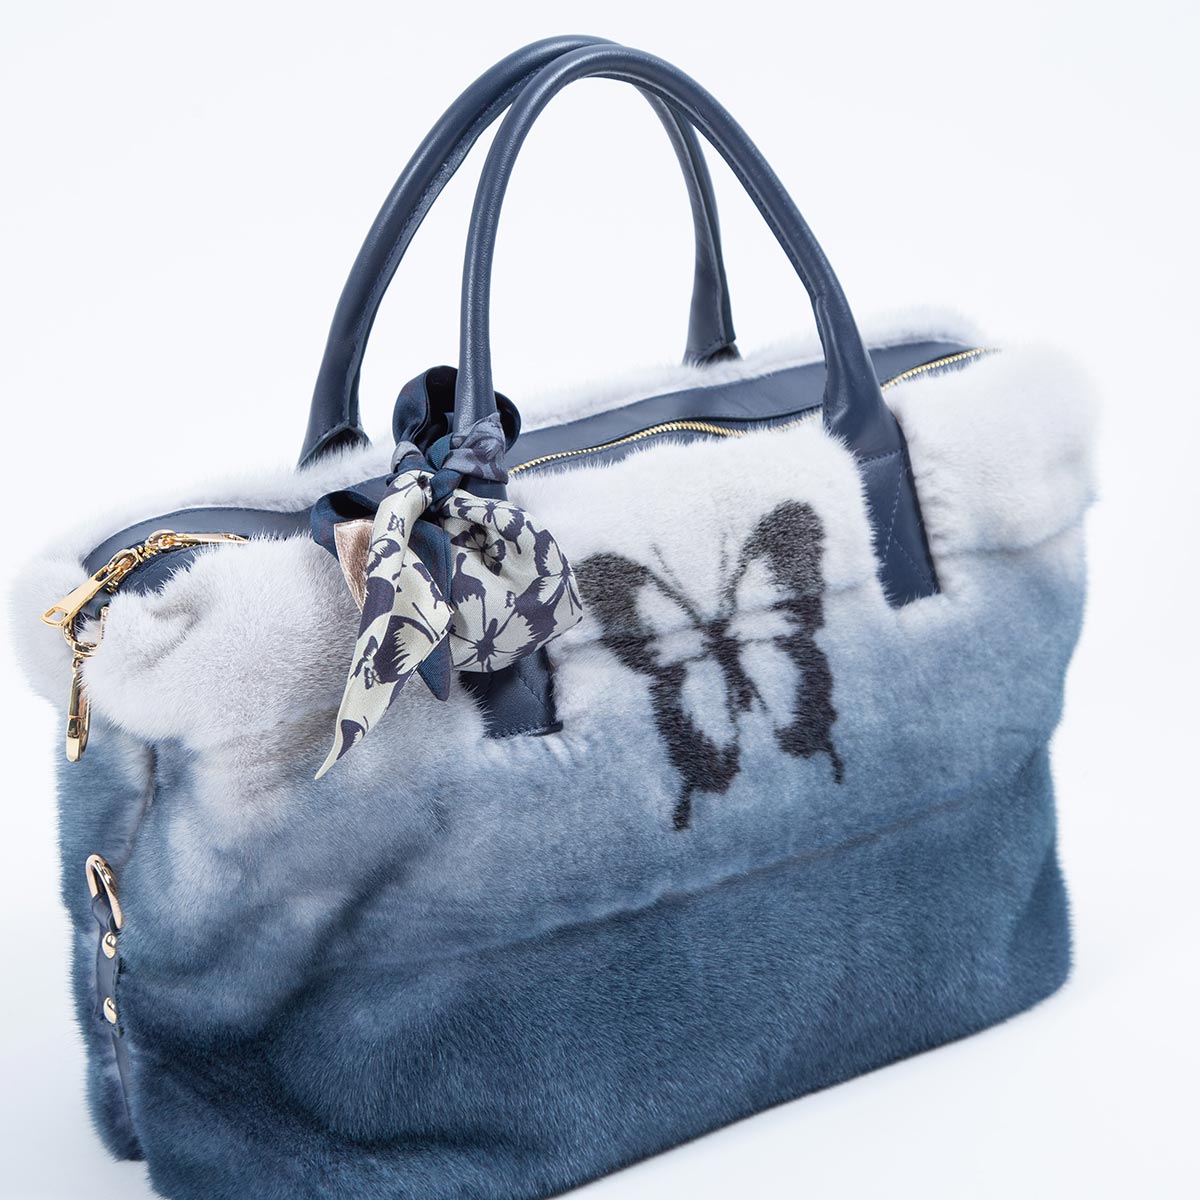 Buy Monkey Sling Fur Bag Online at Low Prices in India - Amazon.in